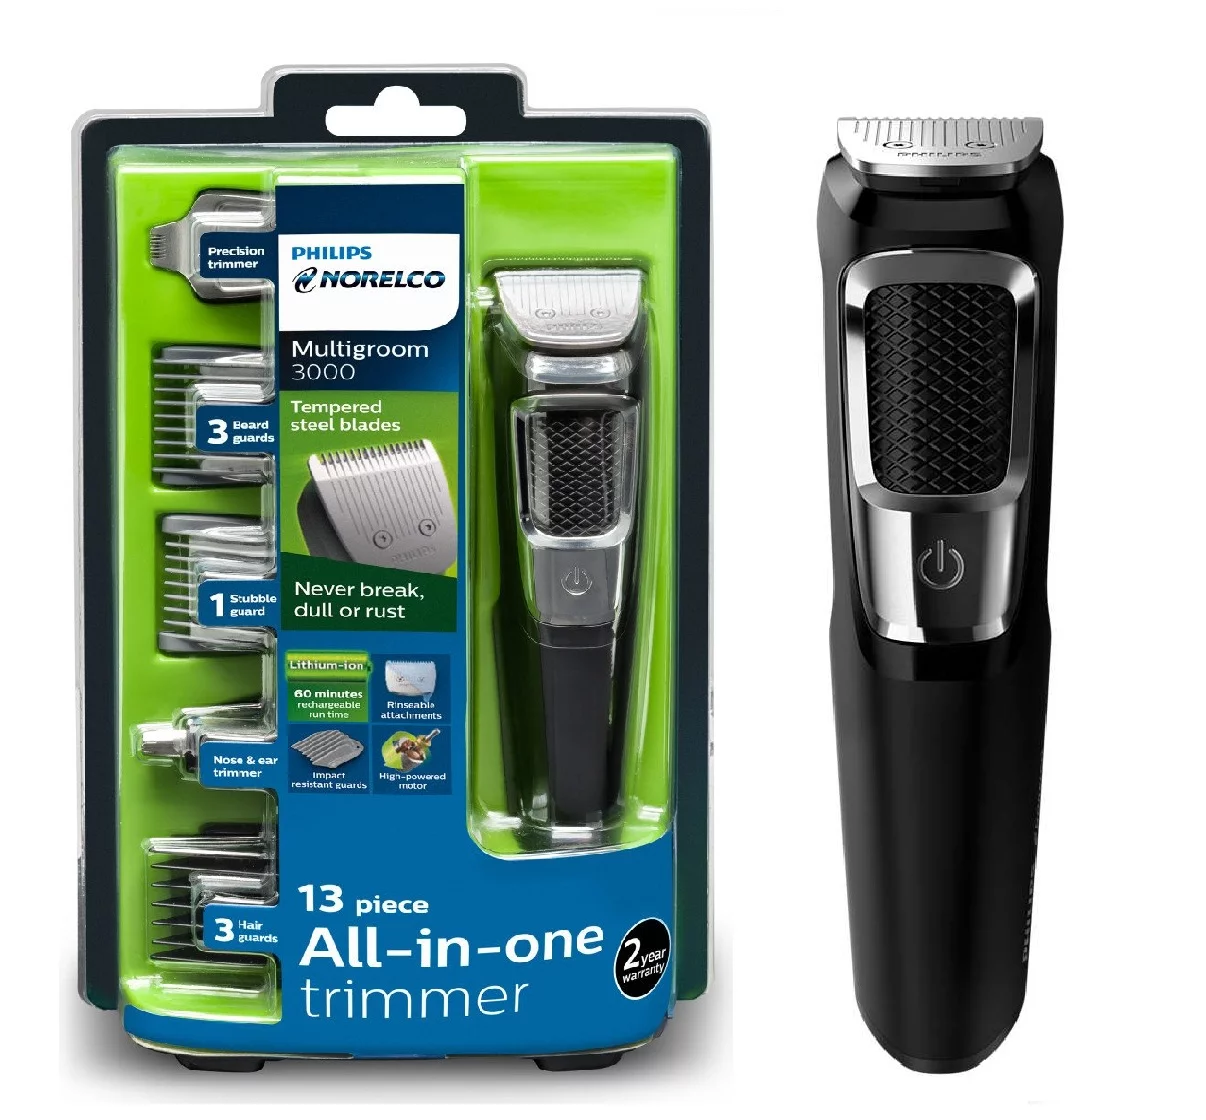 A box of the all in one trimmer